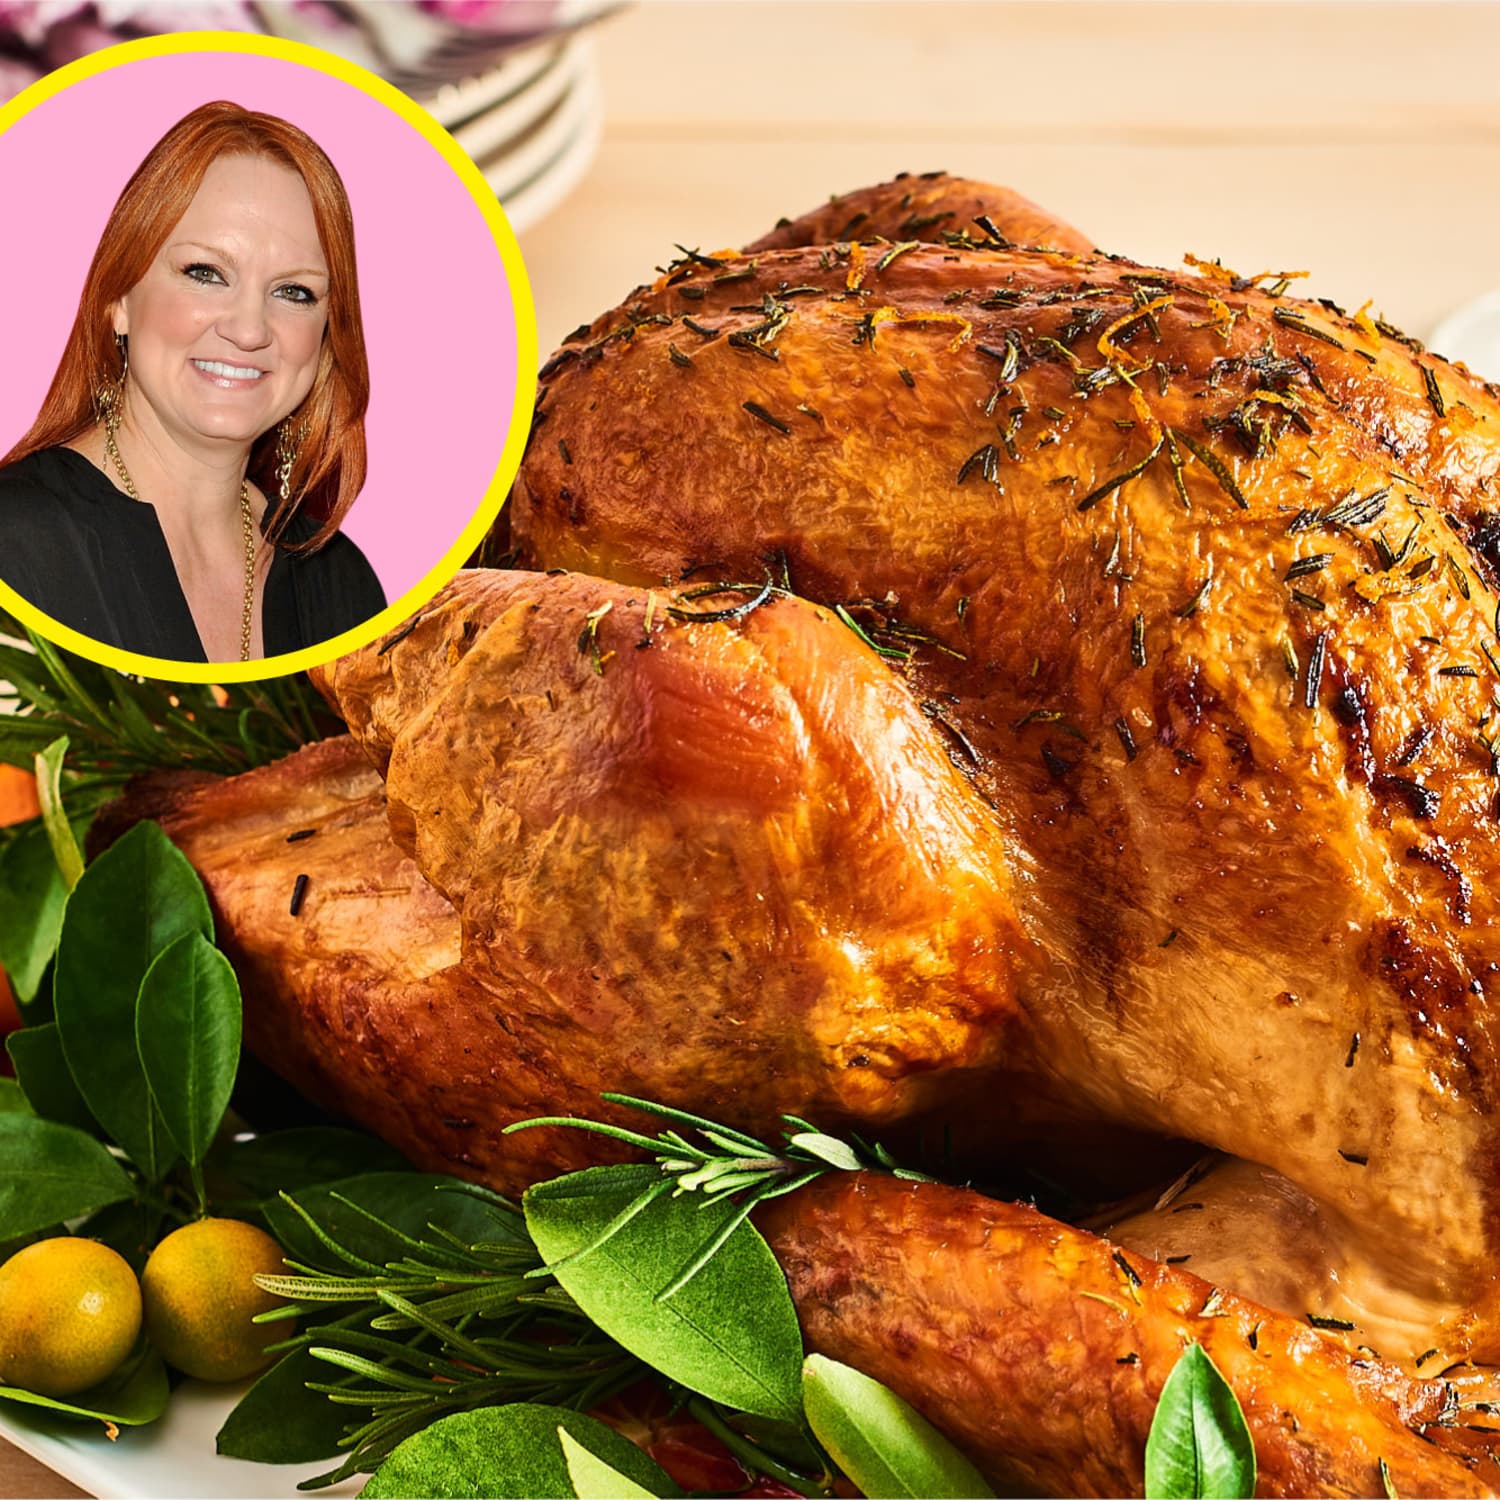 Ree Drummond Recipes Baked Turkey : The Best Pioneer Woman Casserole Recipes Popsugar Food / For ...